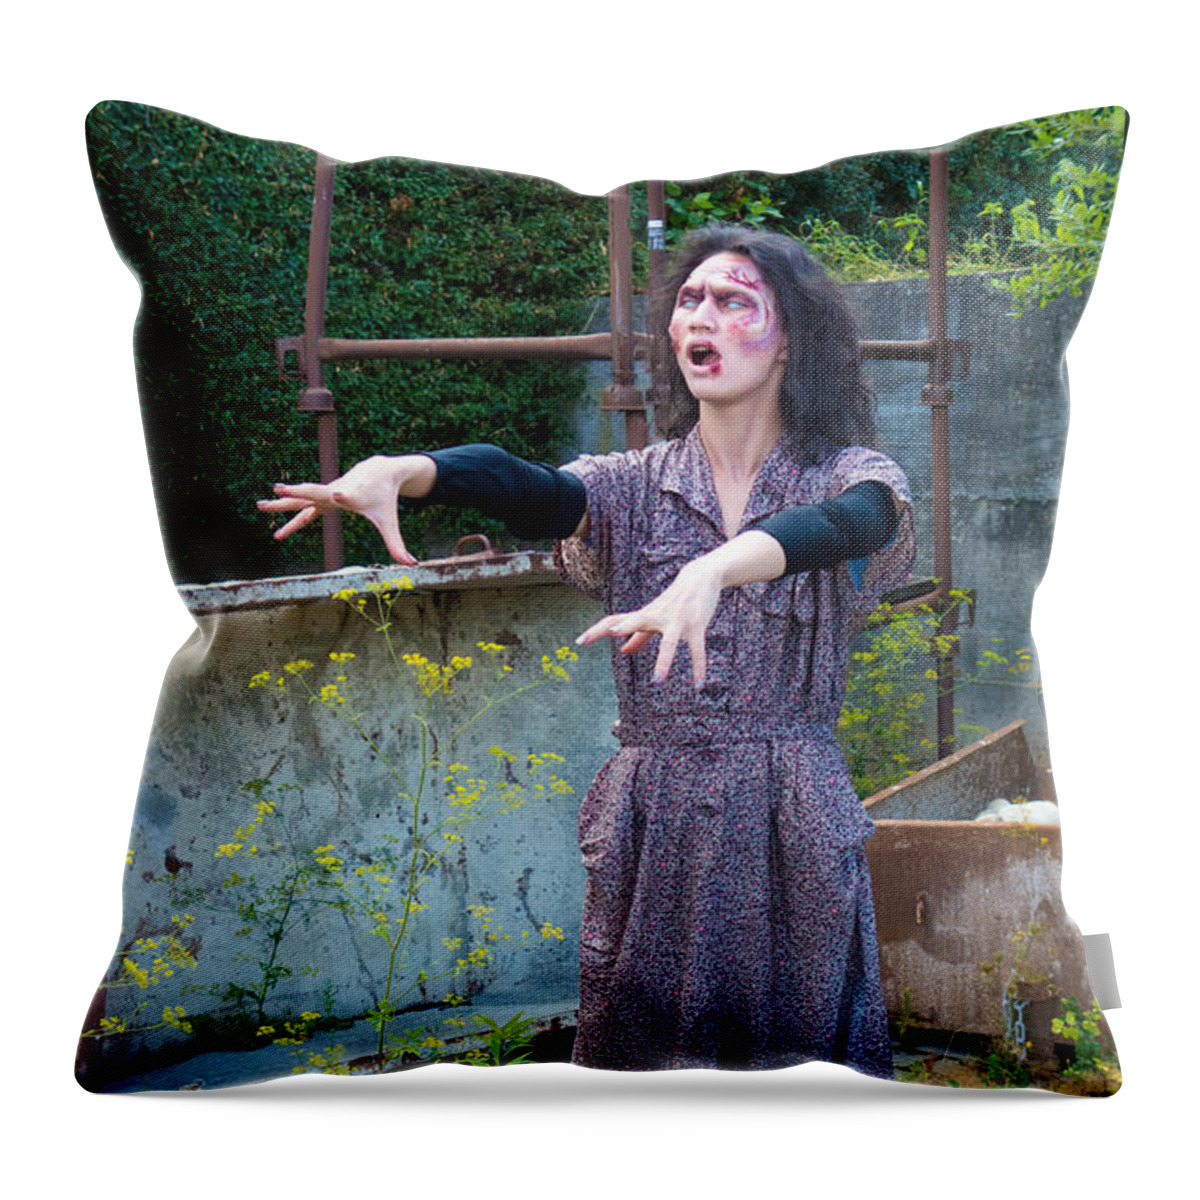 Zombie Throw Pillow featuring the photograph Zombie woman walking by Matthias Hauser